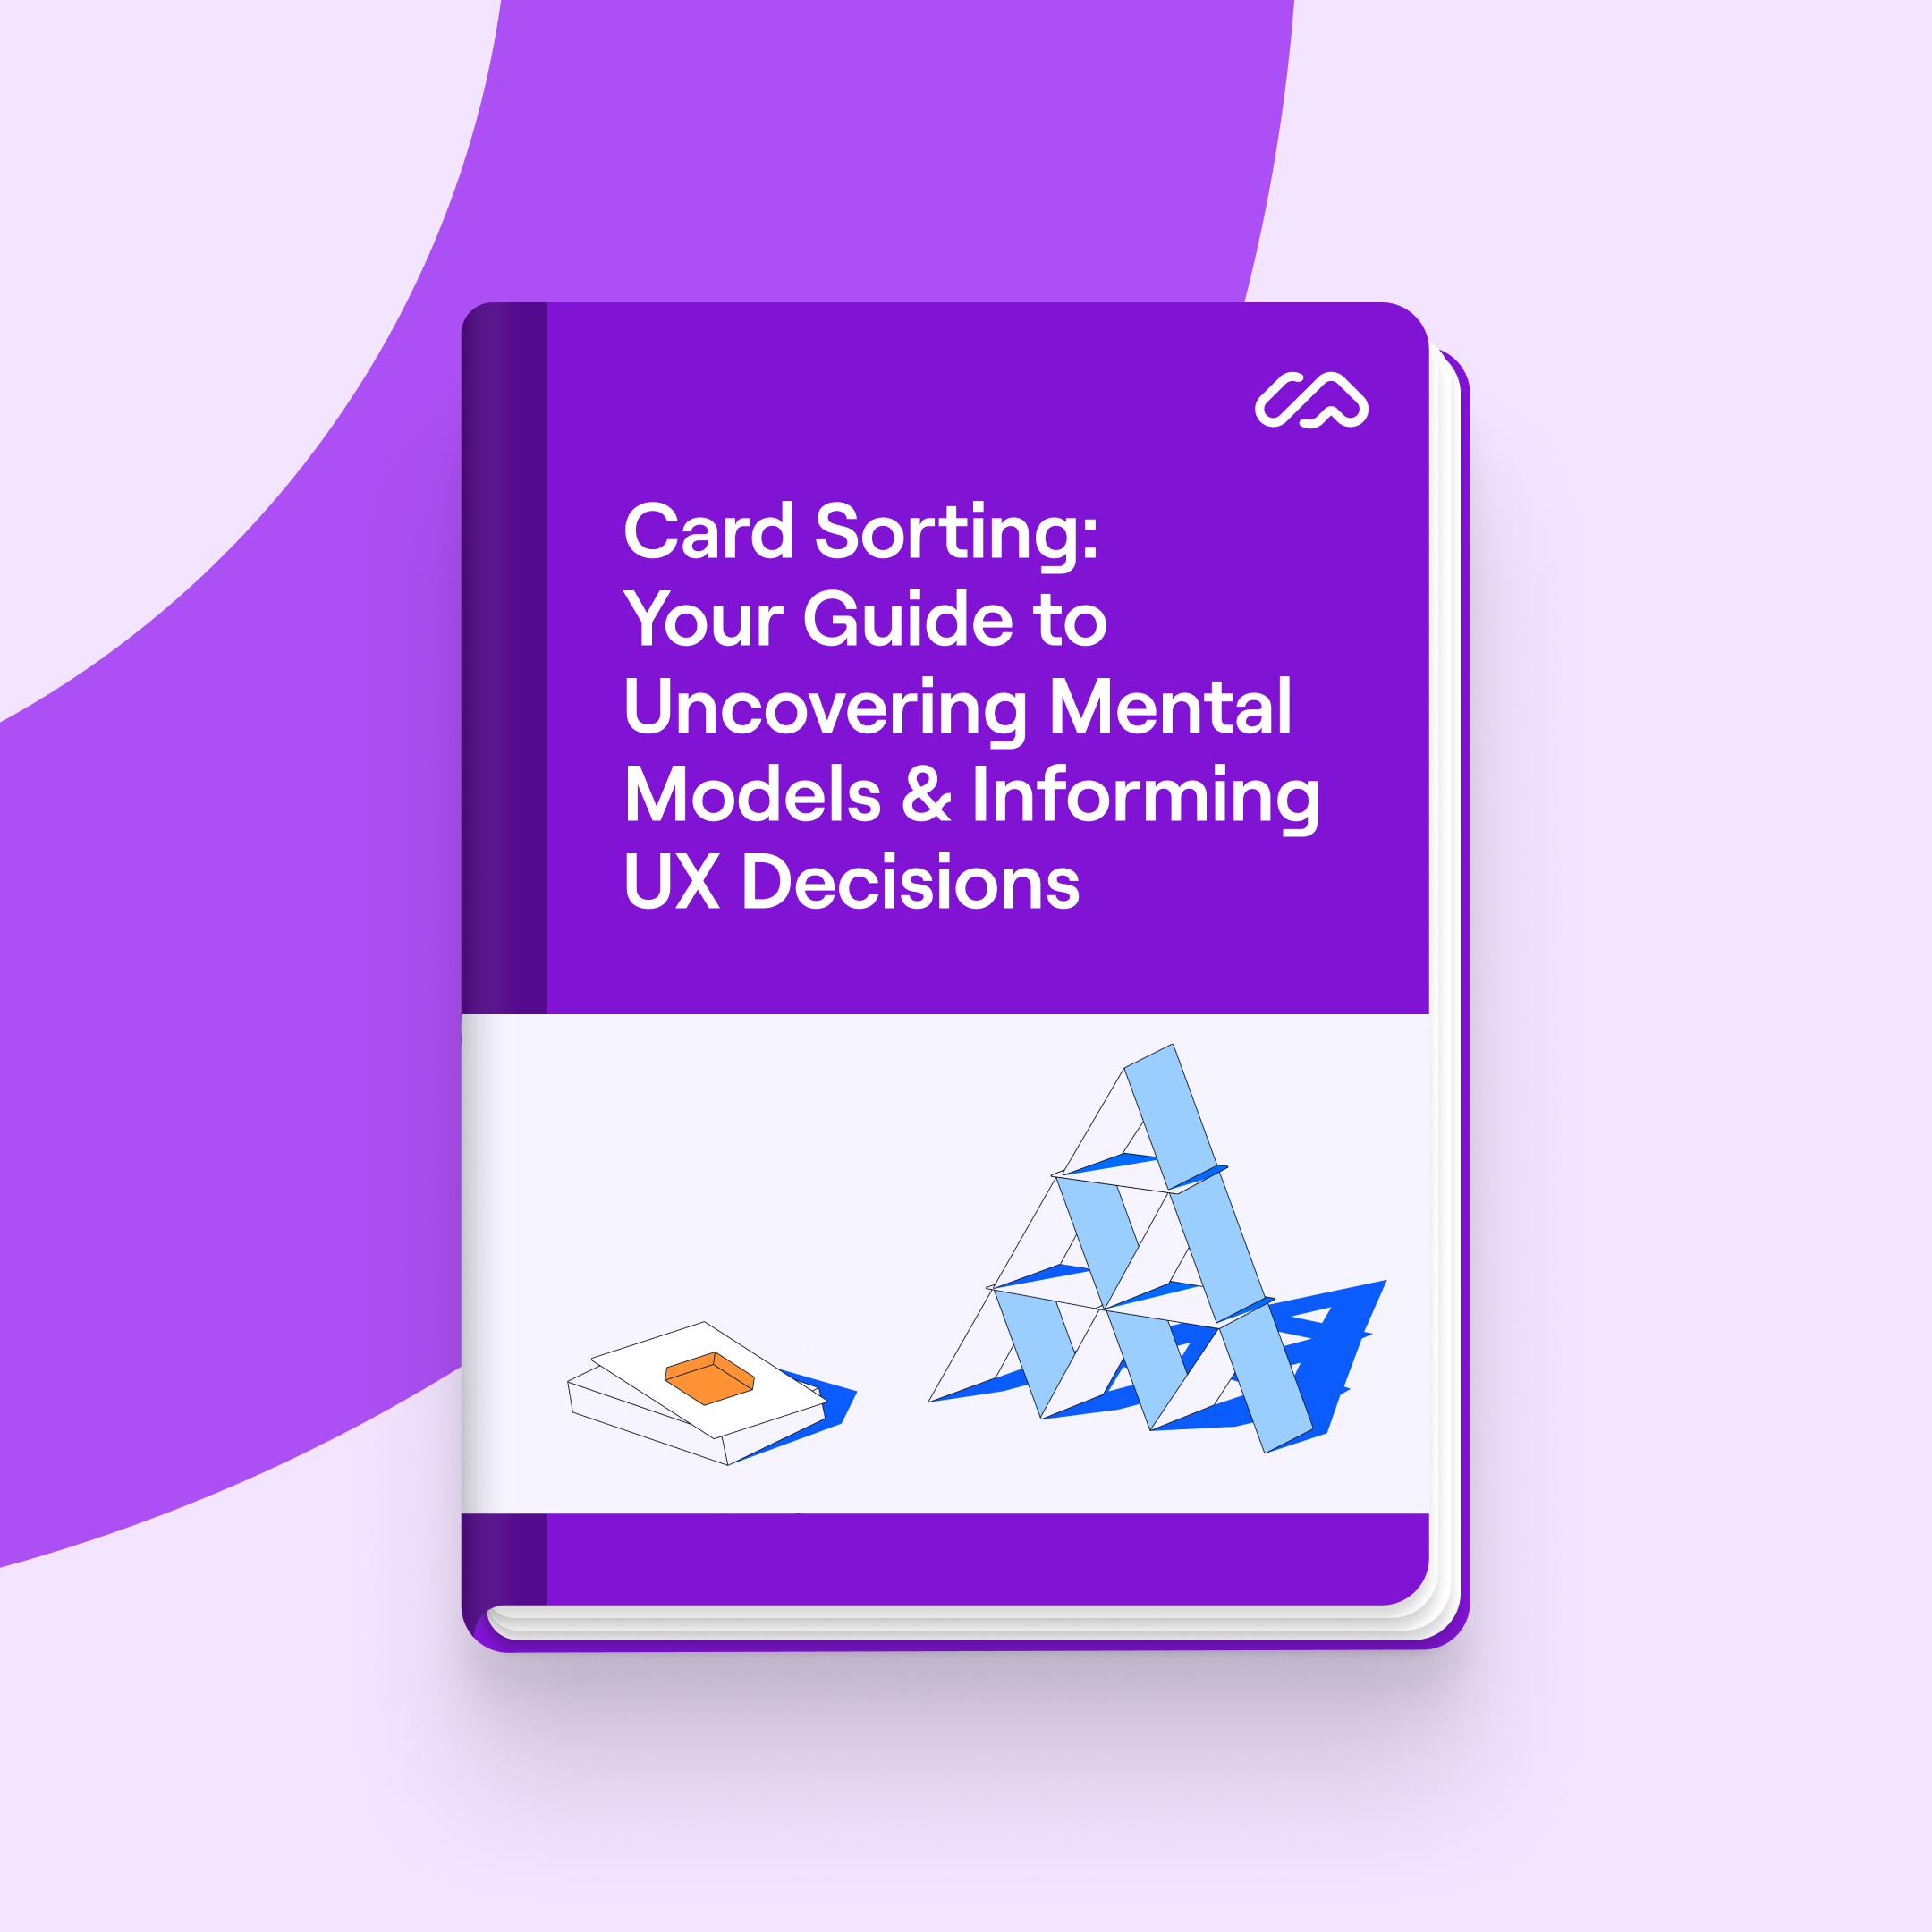 Card Sorting: Your Guide to Uncovering Mental Models & Informing UX Decisions